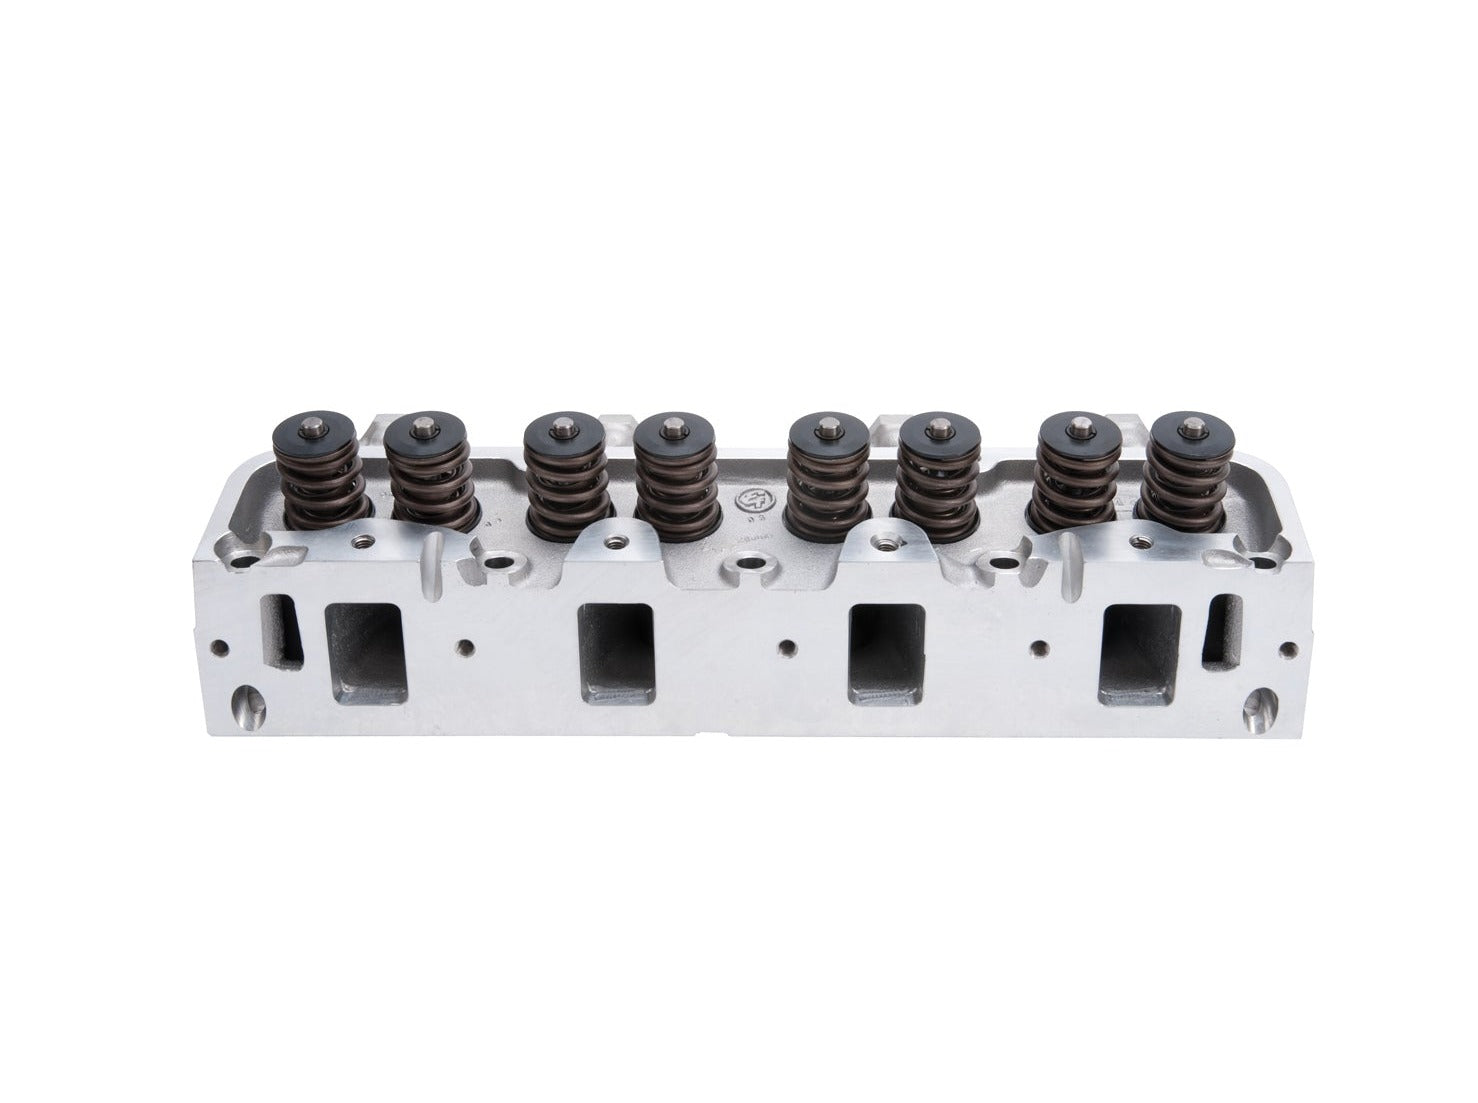 Edelbrock RPM Ford FE 390/428 Complete Cylinder Head, 170cc Runner, 72cc Chamber Suit Hydraulic Roller Cam